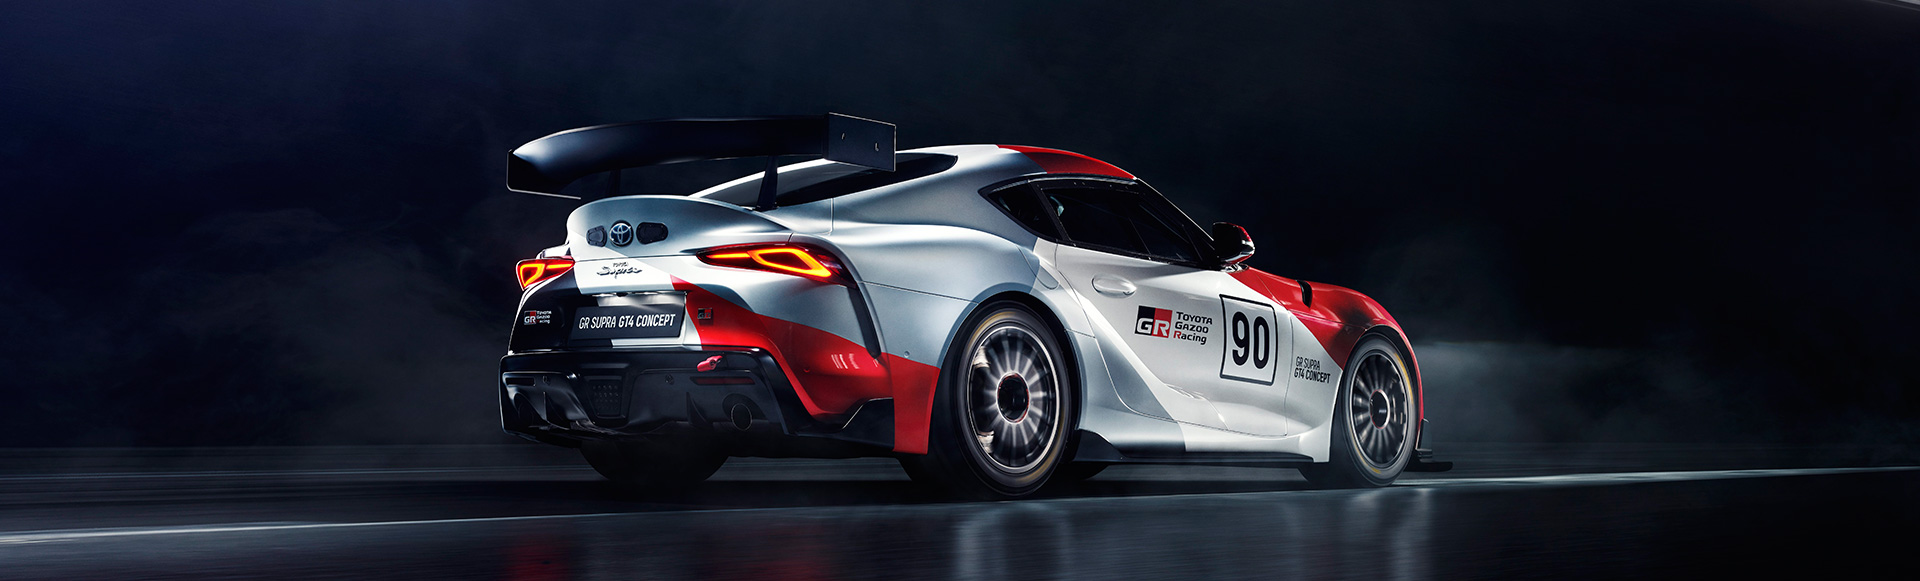 Toyota Presents World Debut Of Gr Supra Gt4 Concept At